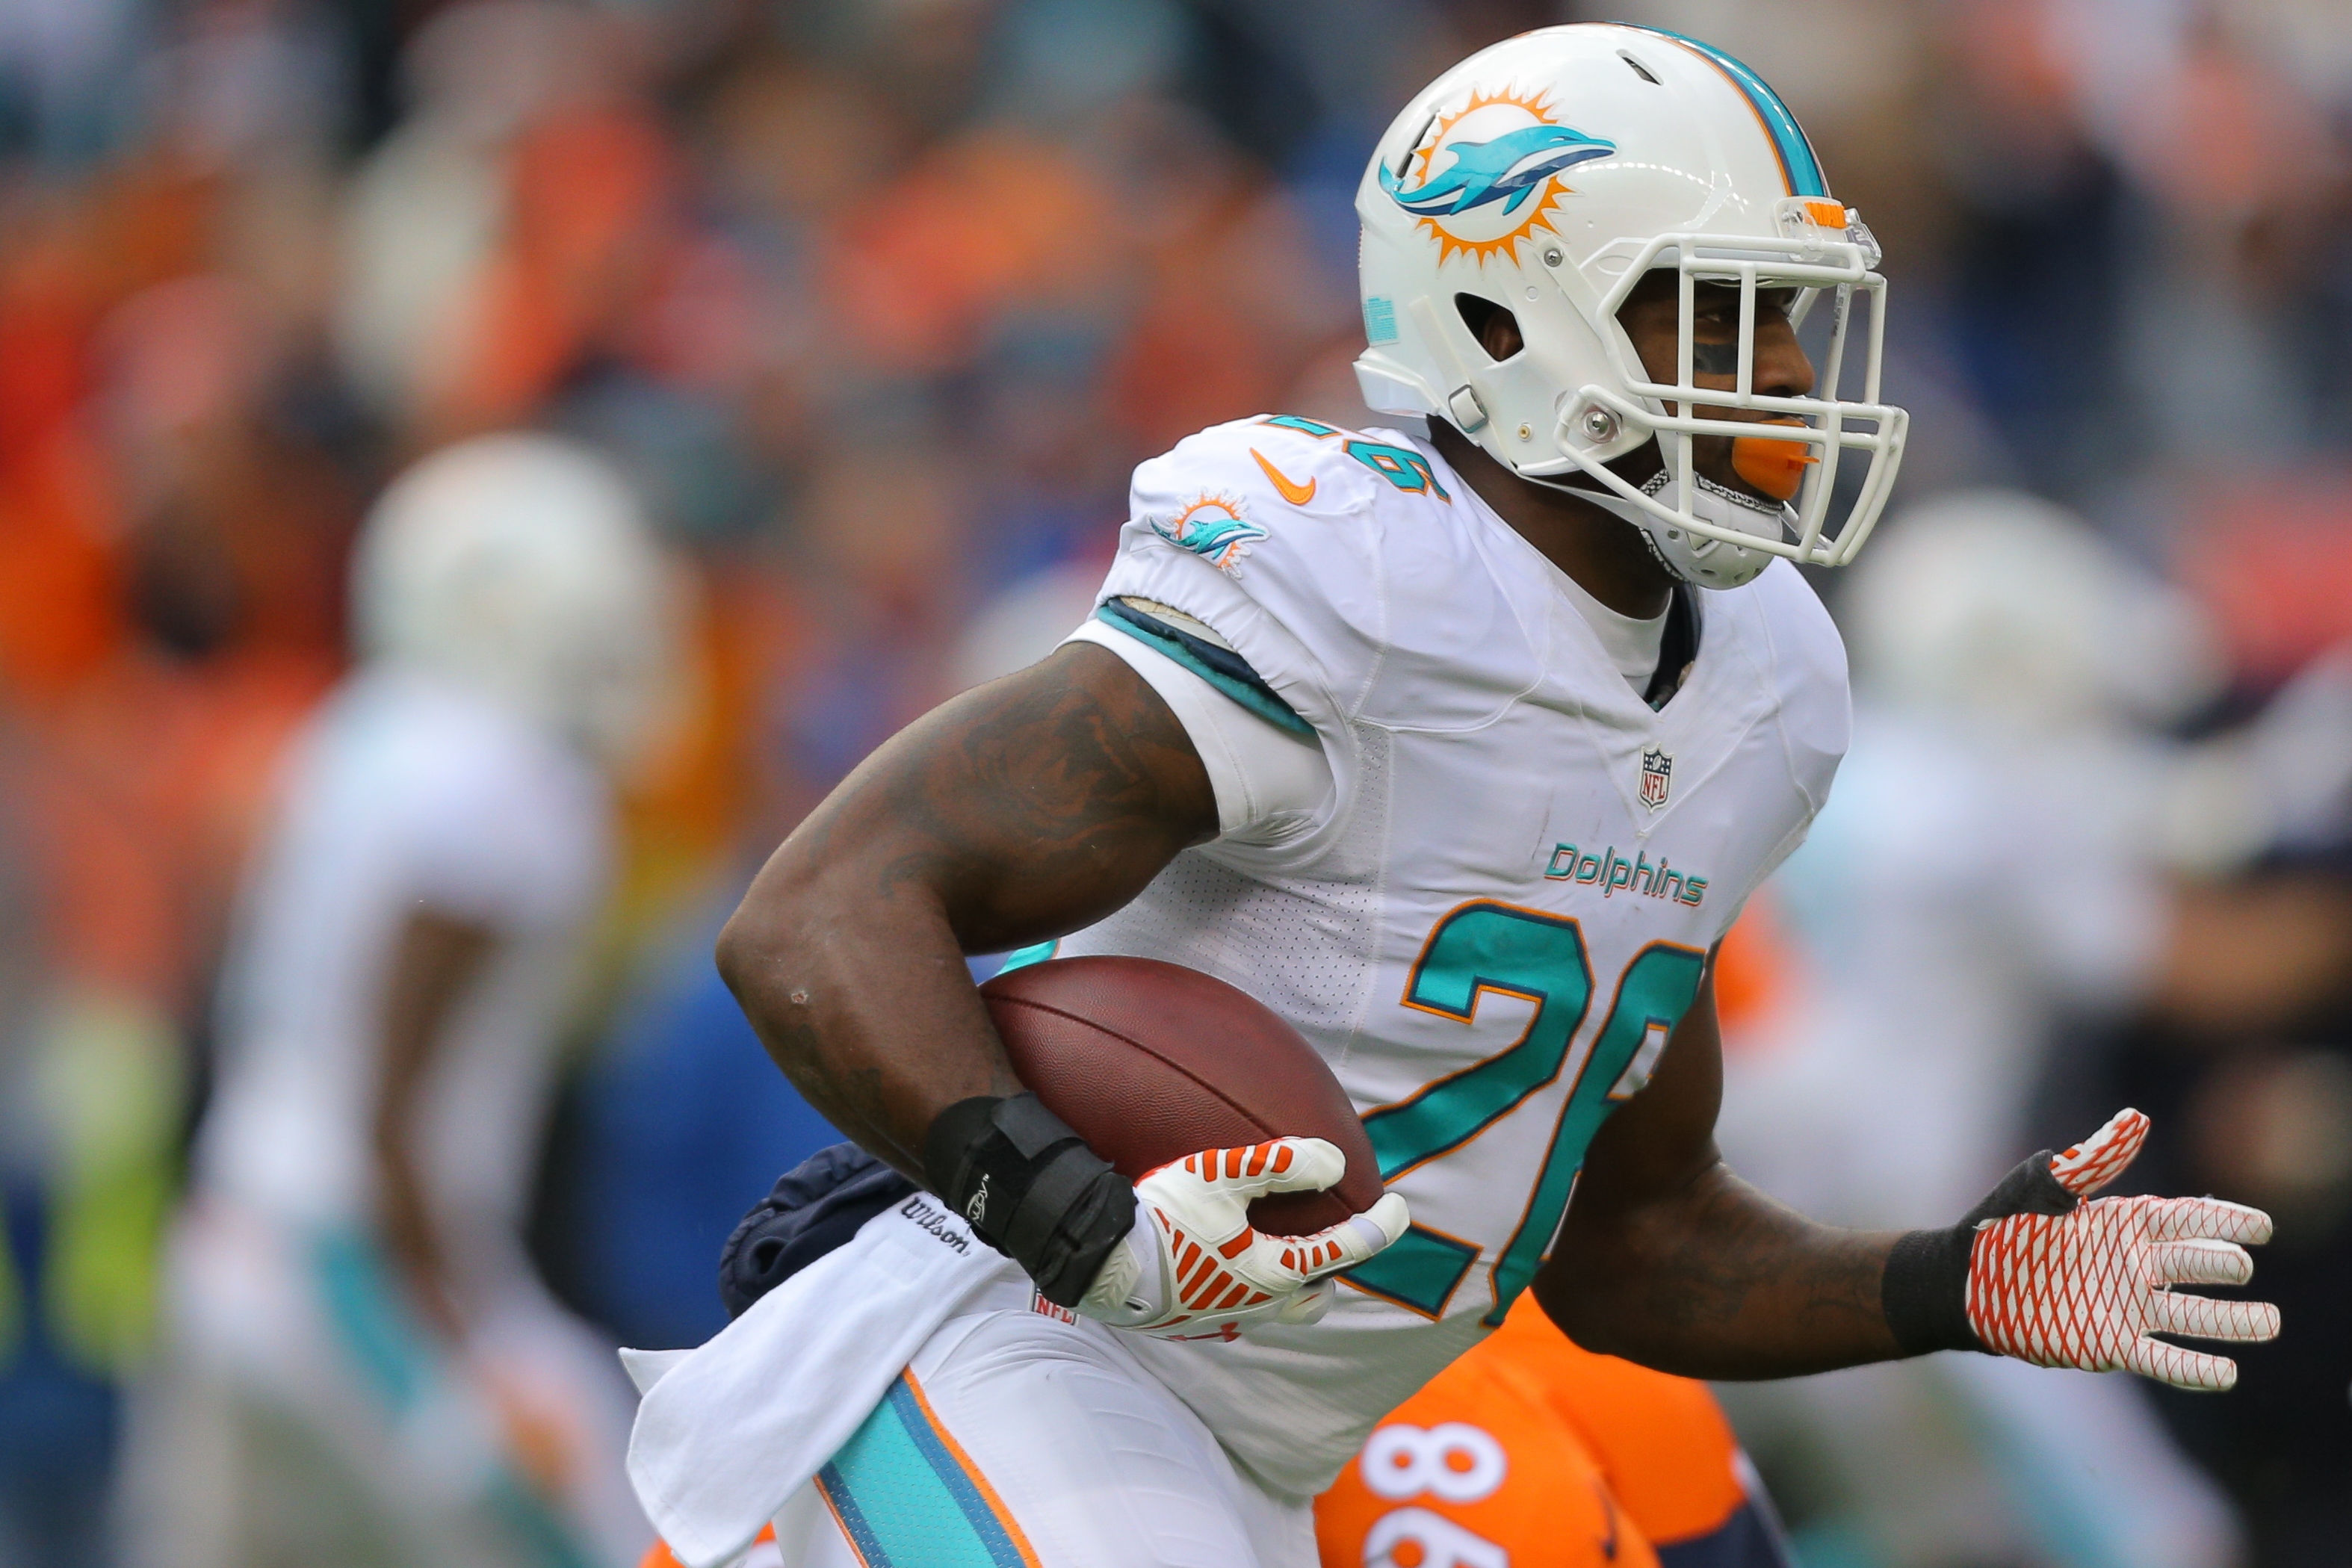 Lamar Miller hopes to avoid another week of struggles against a tough Jets defense. (Getty)